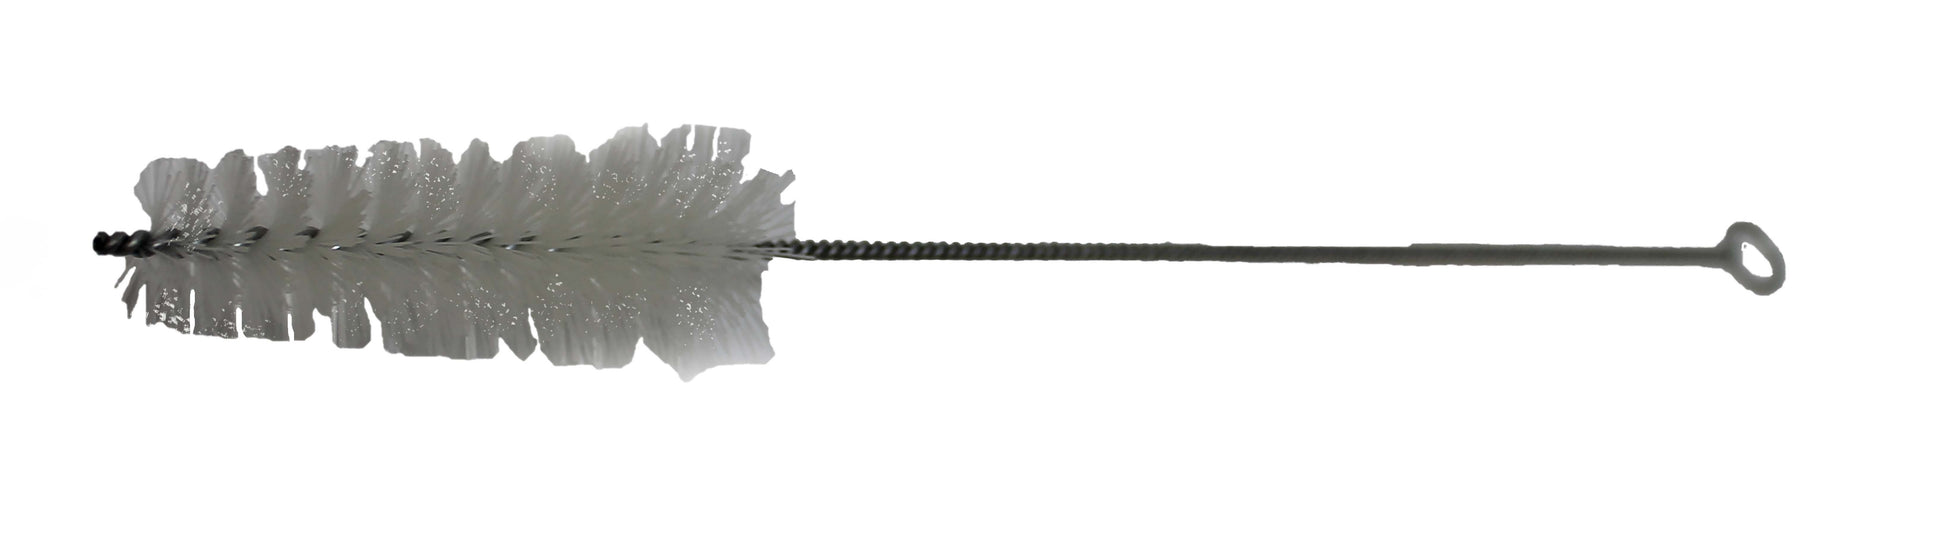 Cask Tap Cleaning Brush